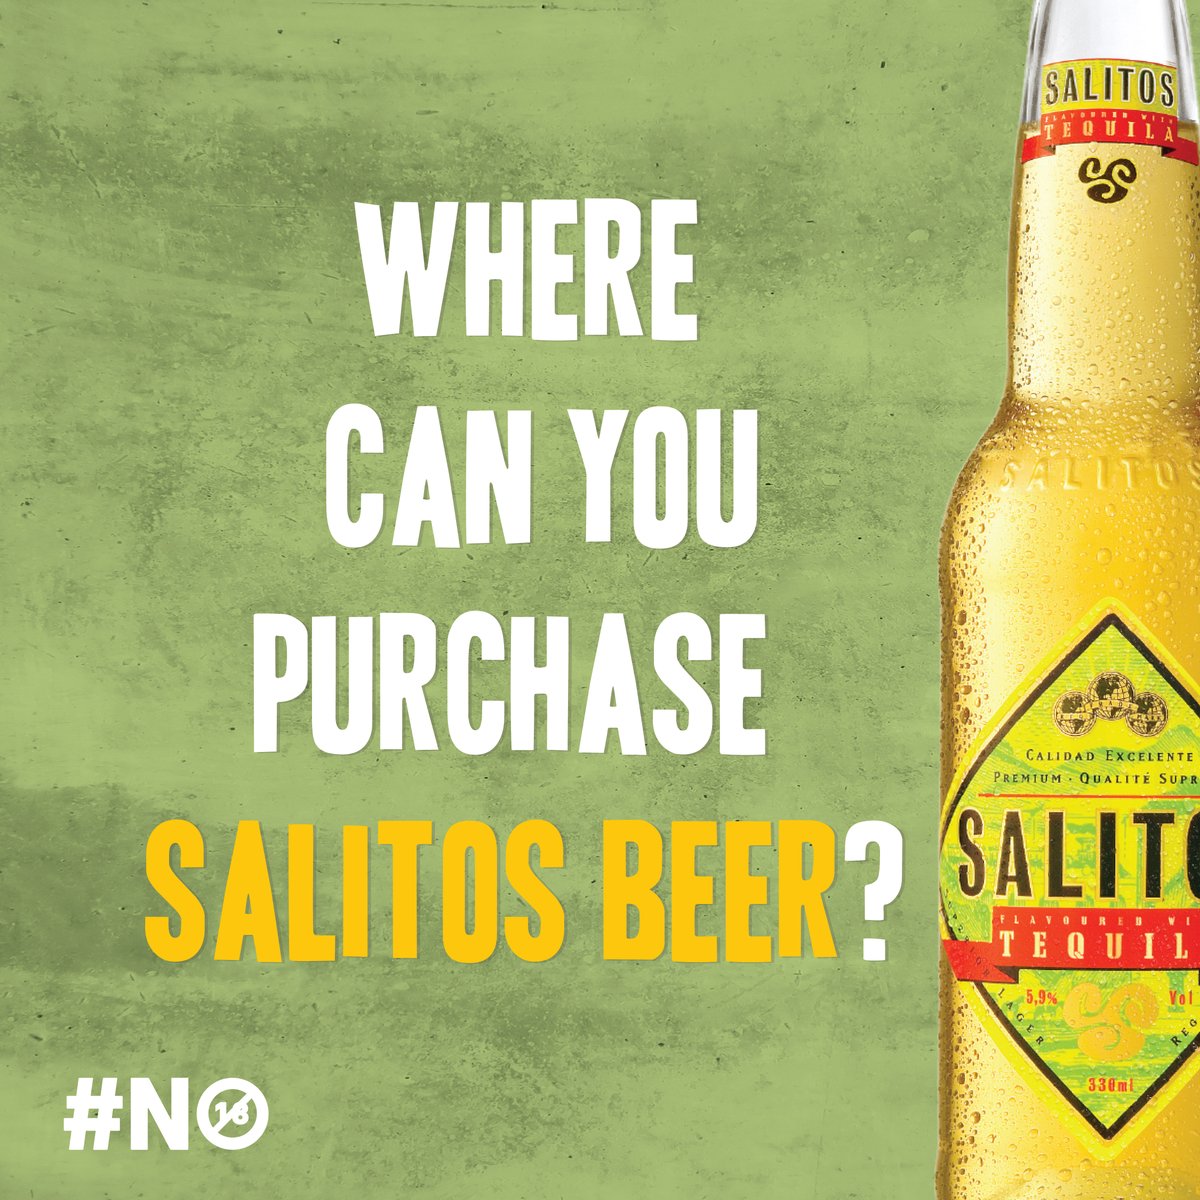 Looking to bringing the fiesta to your own backyard? SALITOS is now available @Takealot, @normangoodfello, @SparUltraLiquor, or @Blue Bottles. 👇 No shame in stocking up for the month, or 2. 😜🍺 🛒🍻 Shop Now: bit.ly/3RYAtao #SalitosBeer #SALITOSRepublic